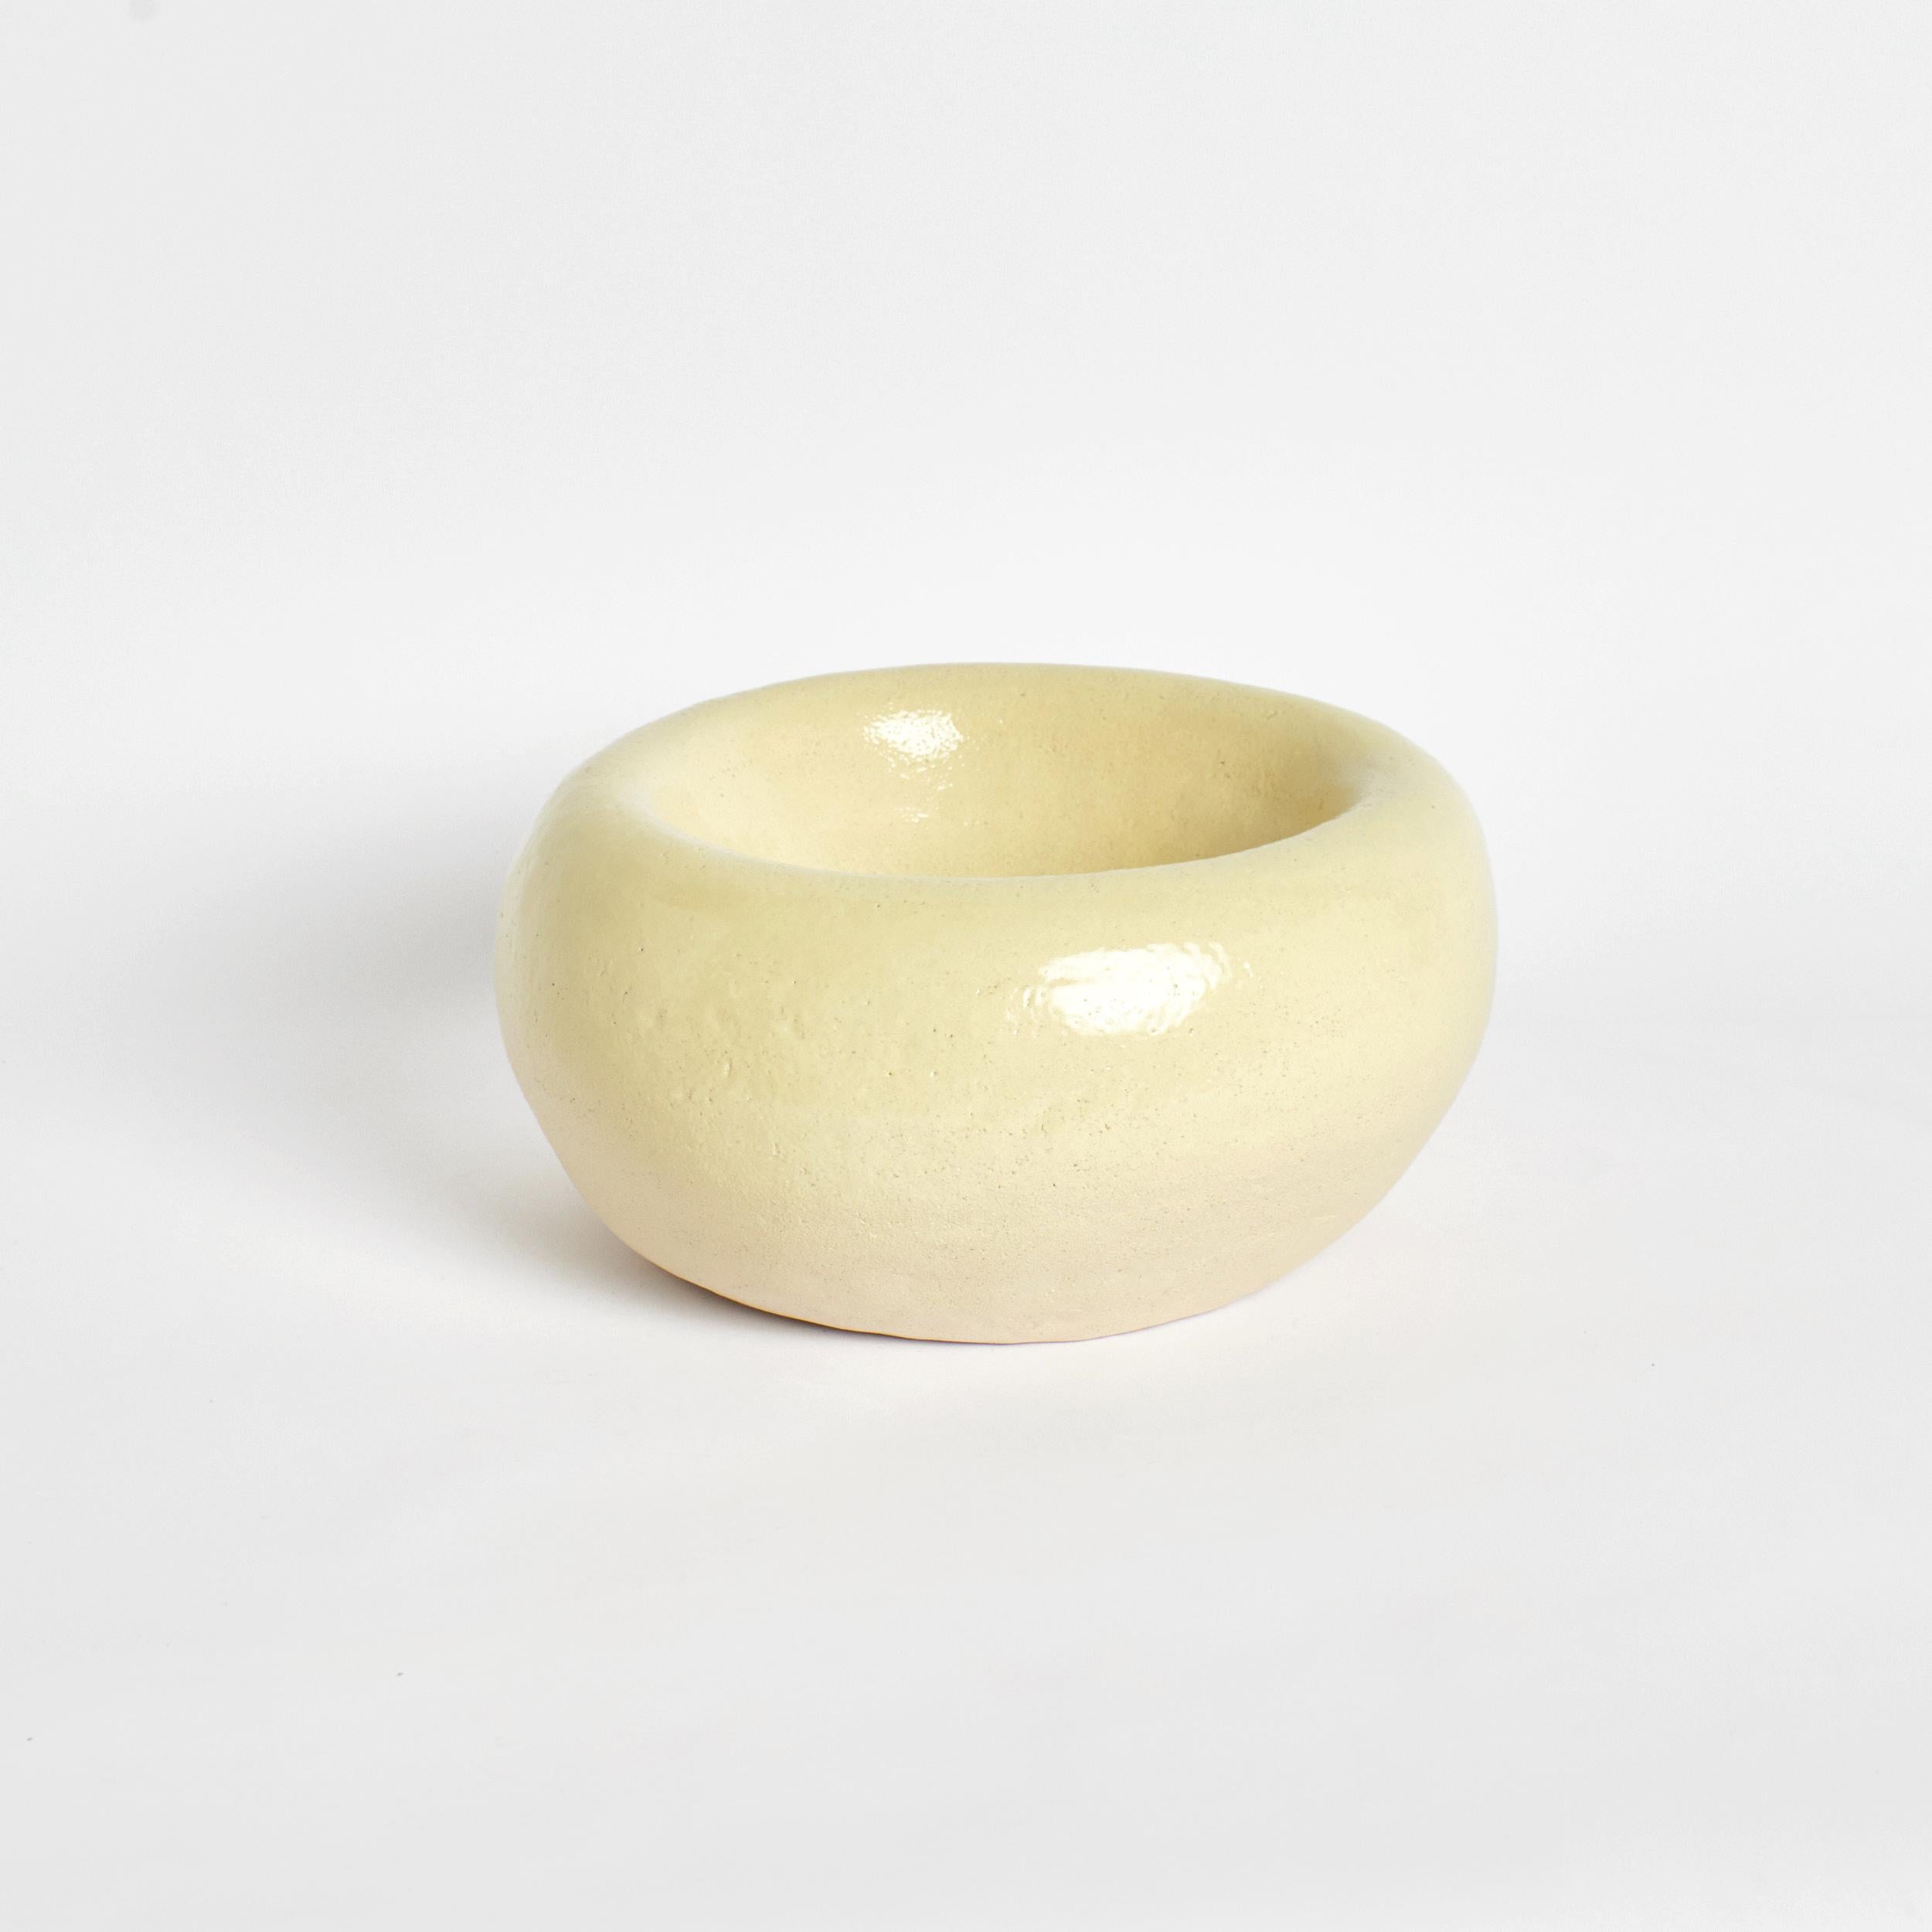 Poet bowl in yellow by Project 213A
Dimensions: D 37 x W 37 x H 17 cm
Materials: Ceramic. 

Hand-sculpted ceramic bowl with a beautiful handmade uneven shape. This extra large piece is finished with a bespoke soft yellow glaze and hallmarked